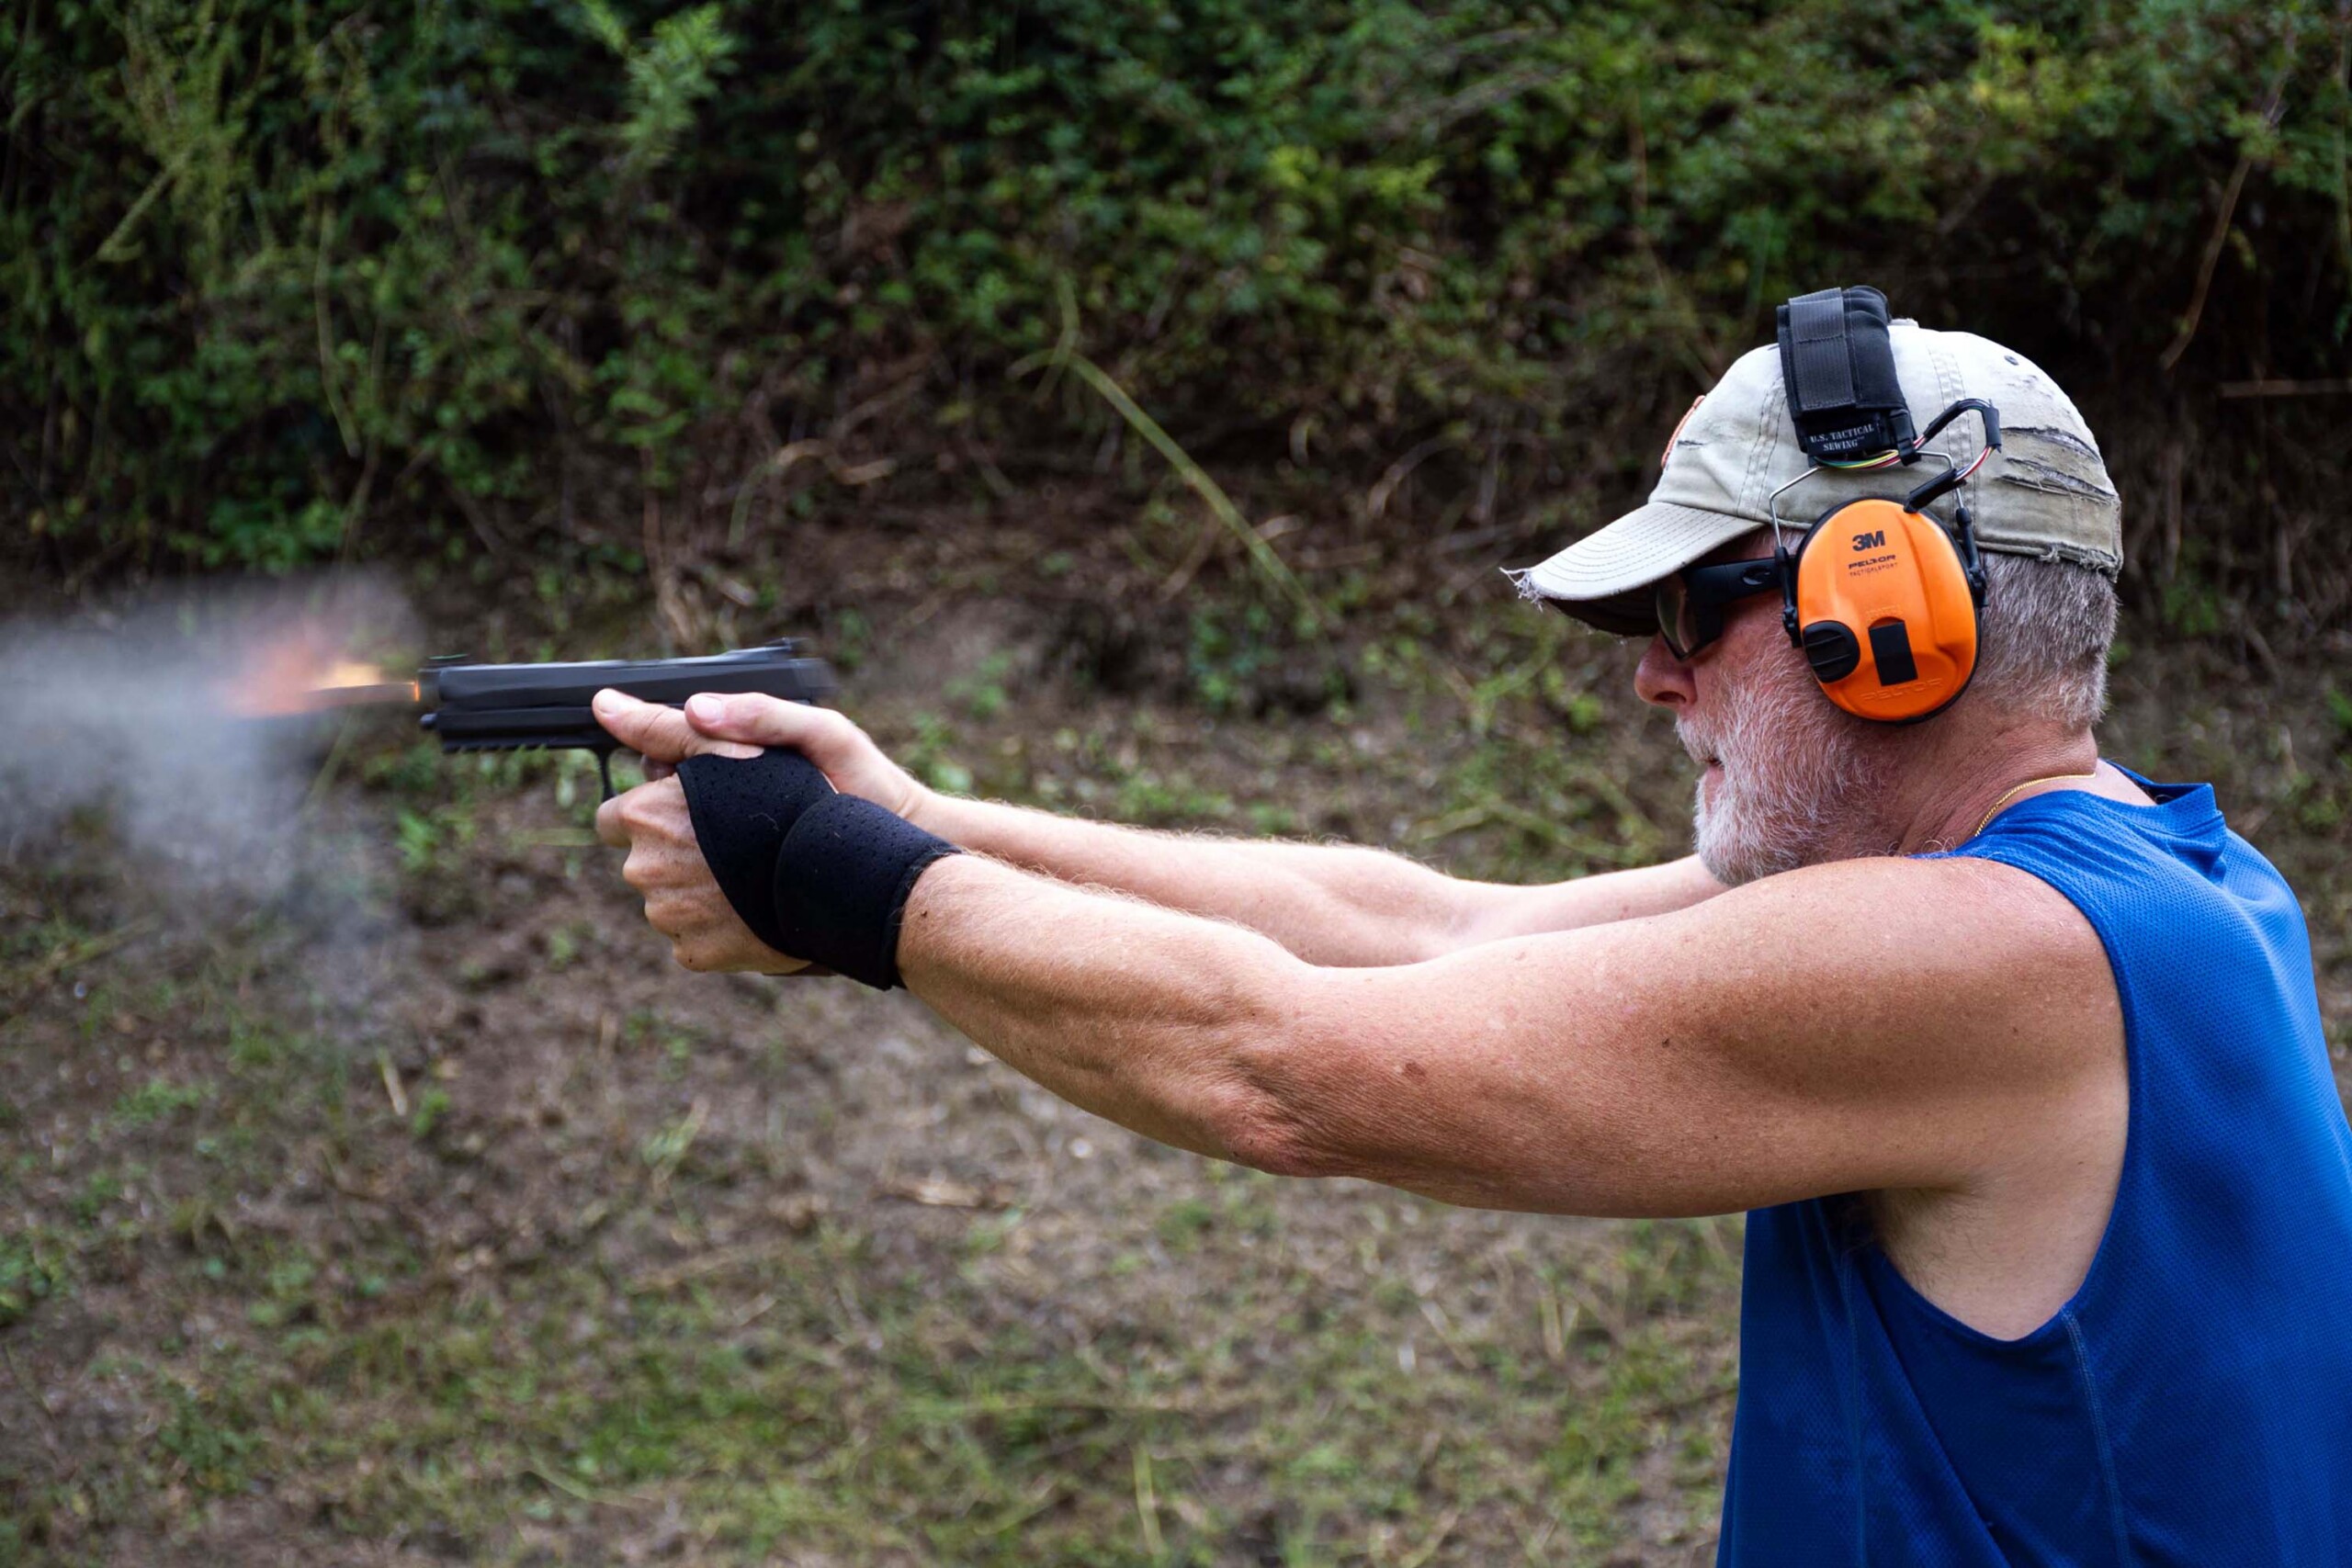 Featured image for “Gun safety classes plummet after concealed carry changes”